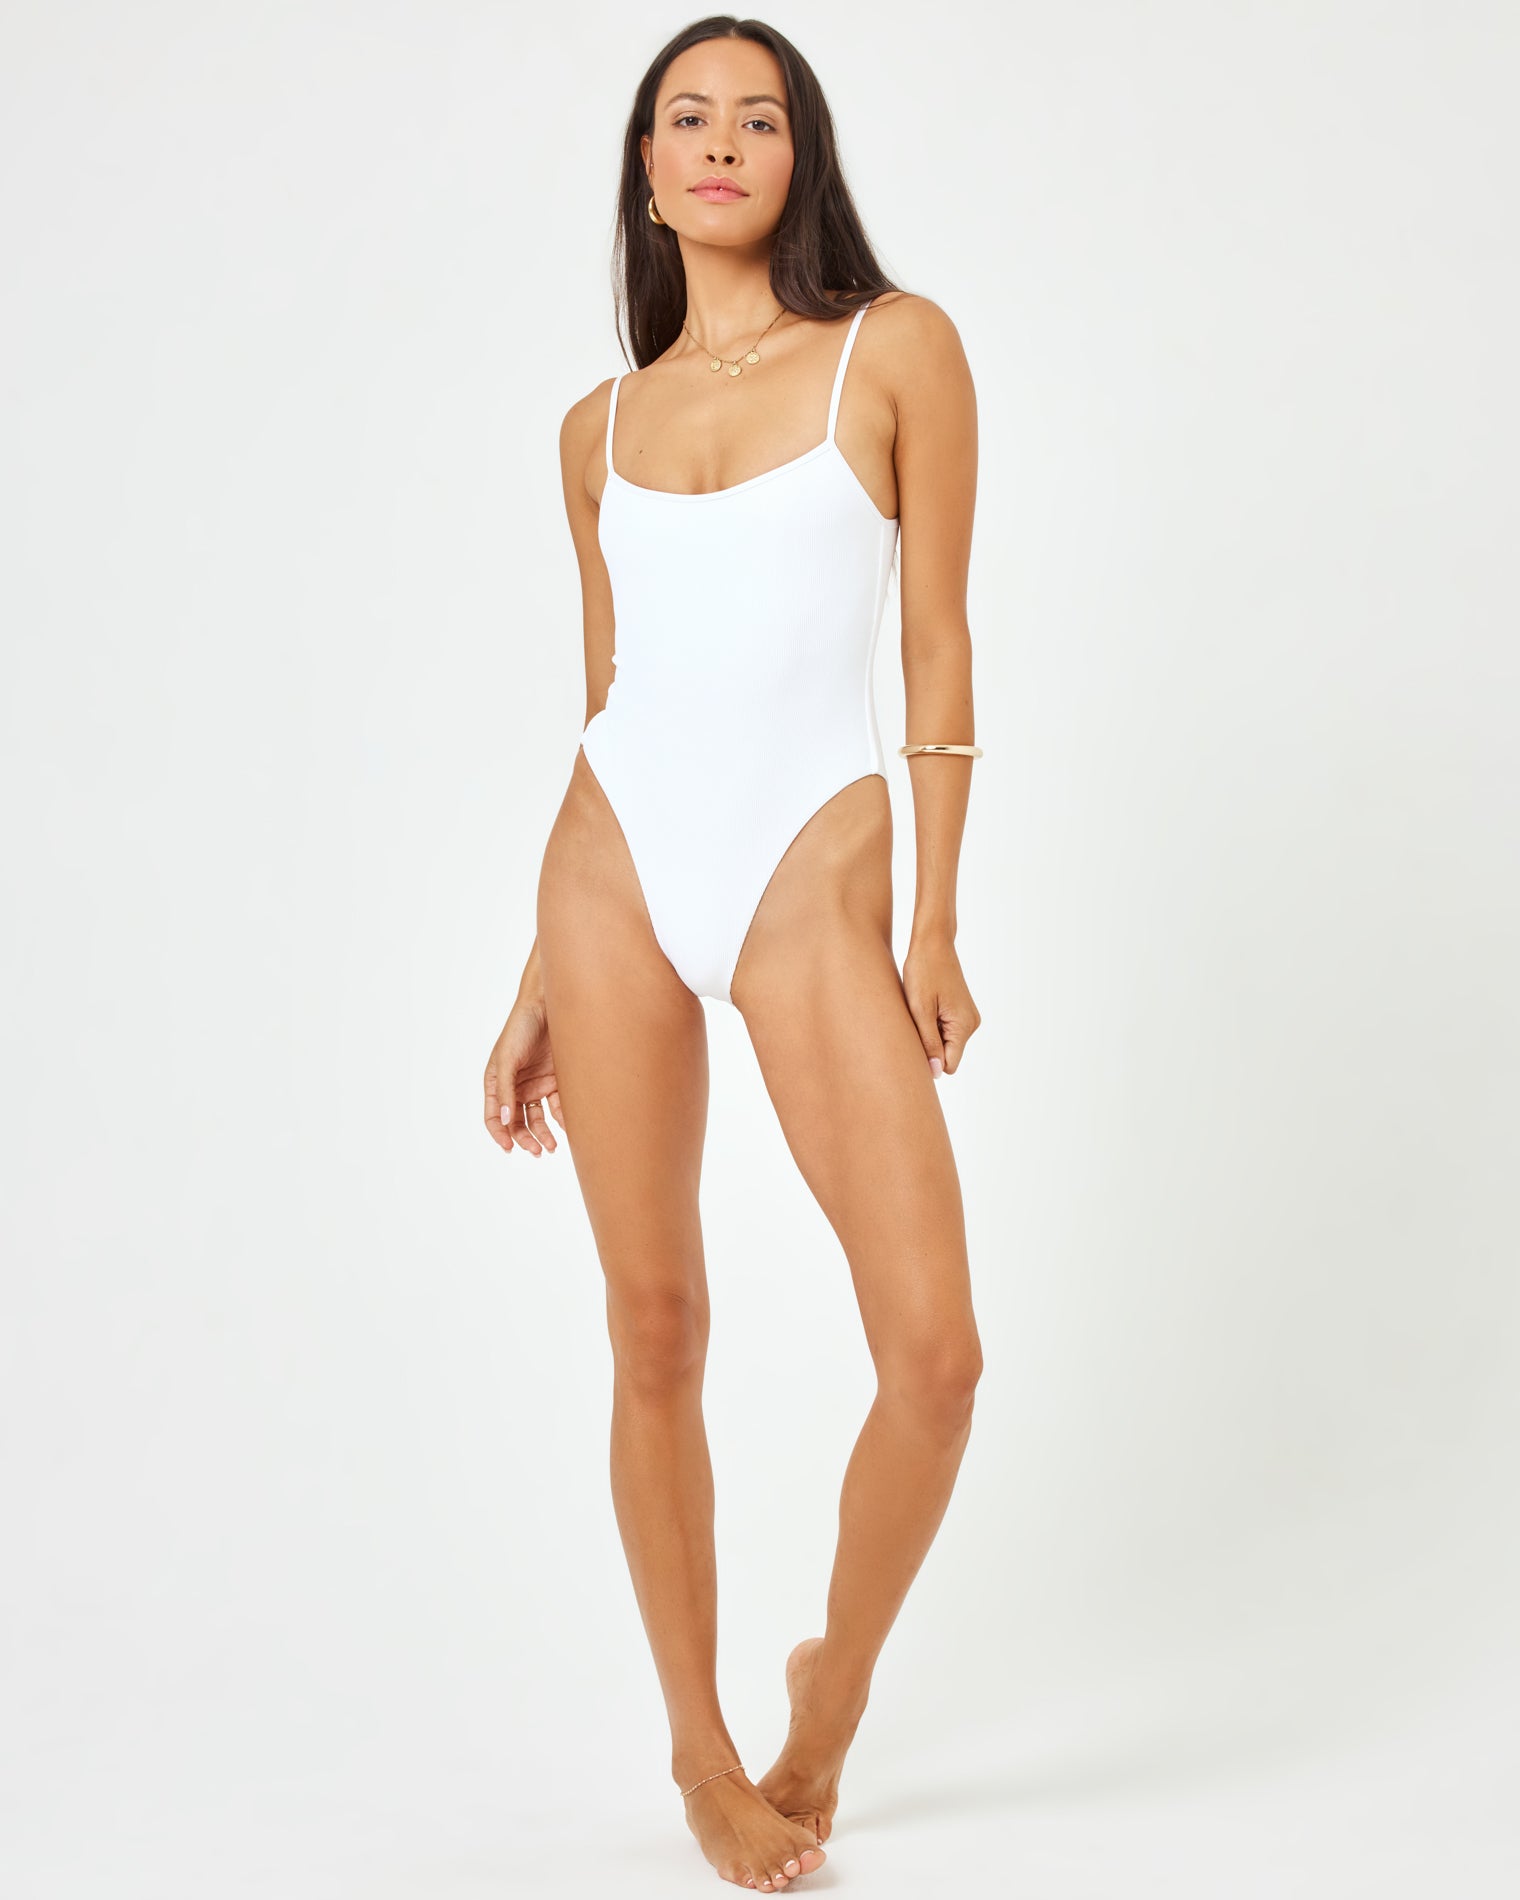 Ribbed Holly One Piece Swimsuit - White White | Model: Emily (size: S)